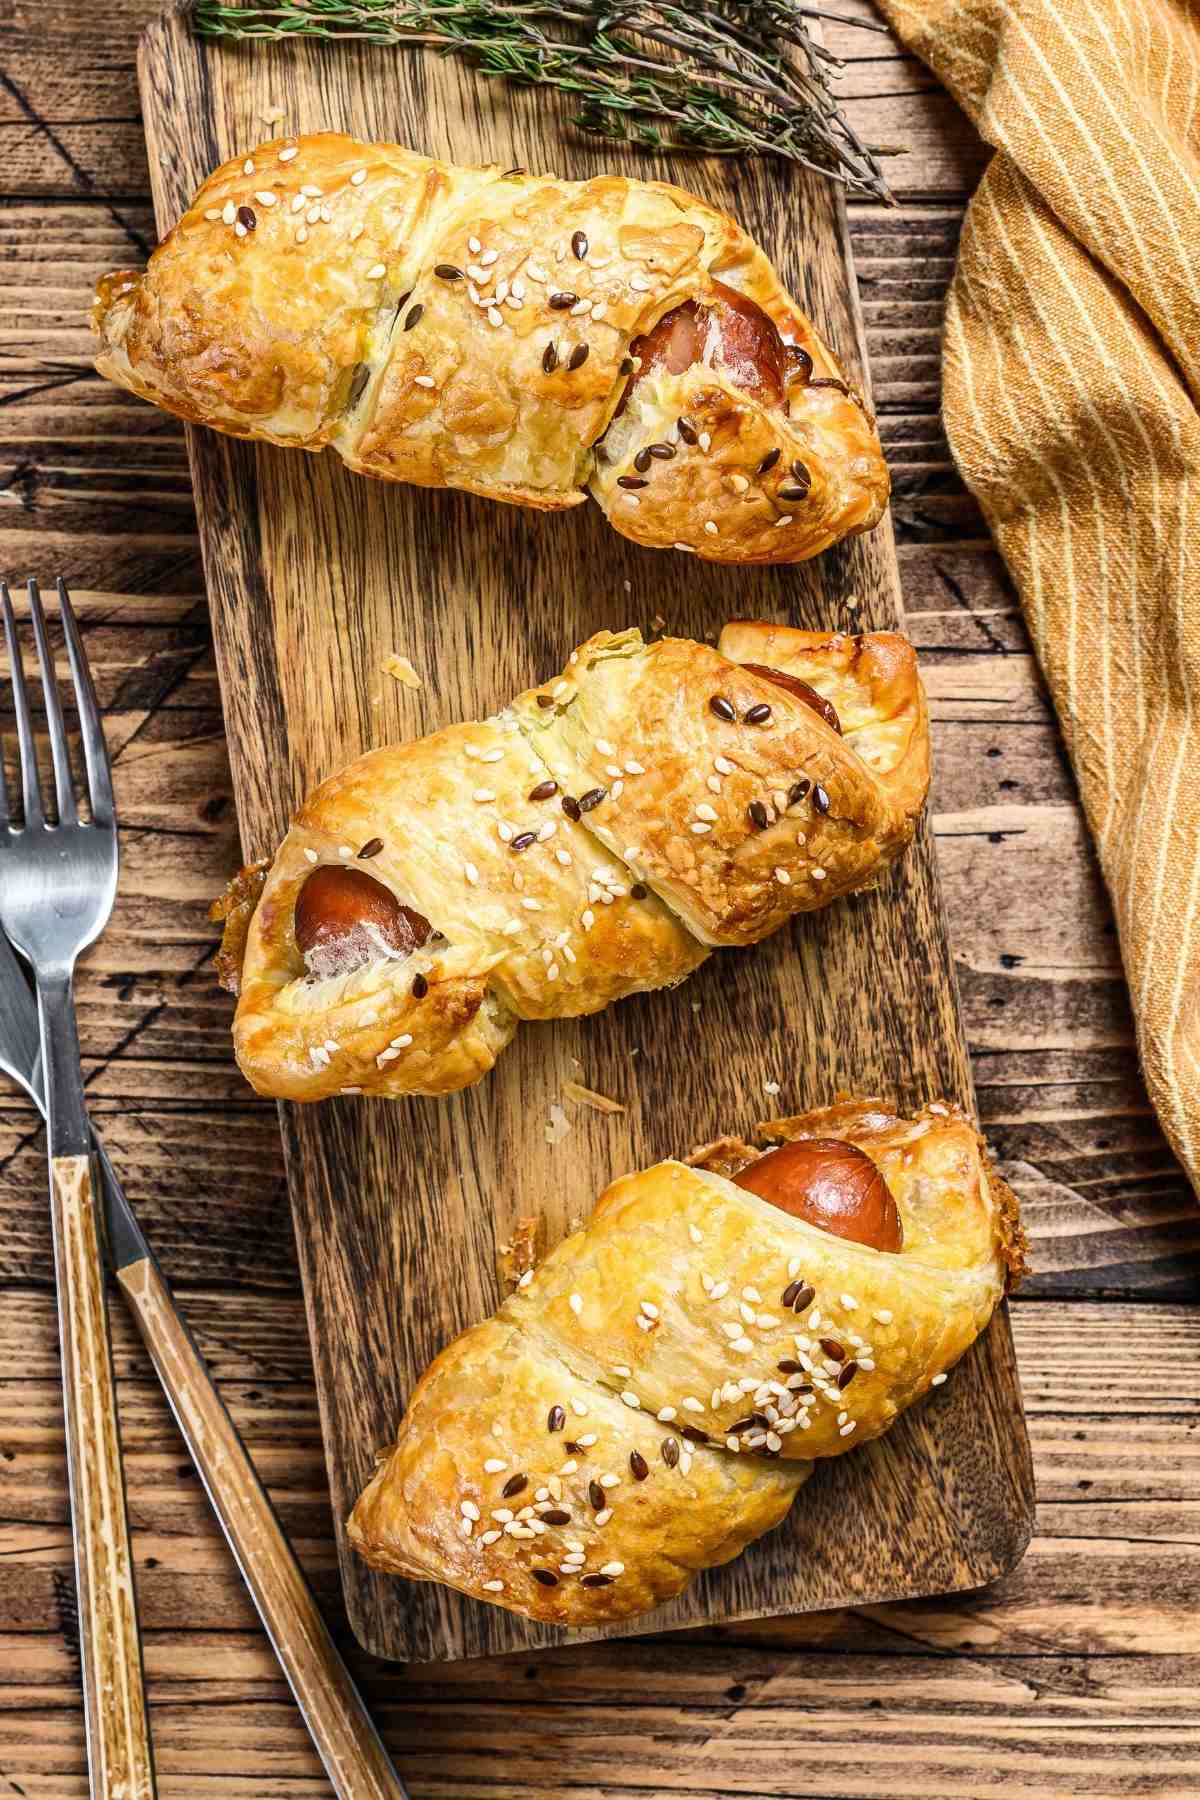 Pigs in a blanket have been a classic party food for decades. Made with store-bought crescent roll dough and cocktail sausages, they’re super easy to make.